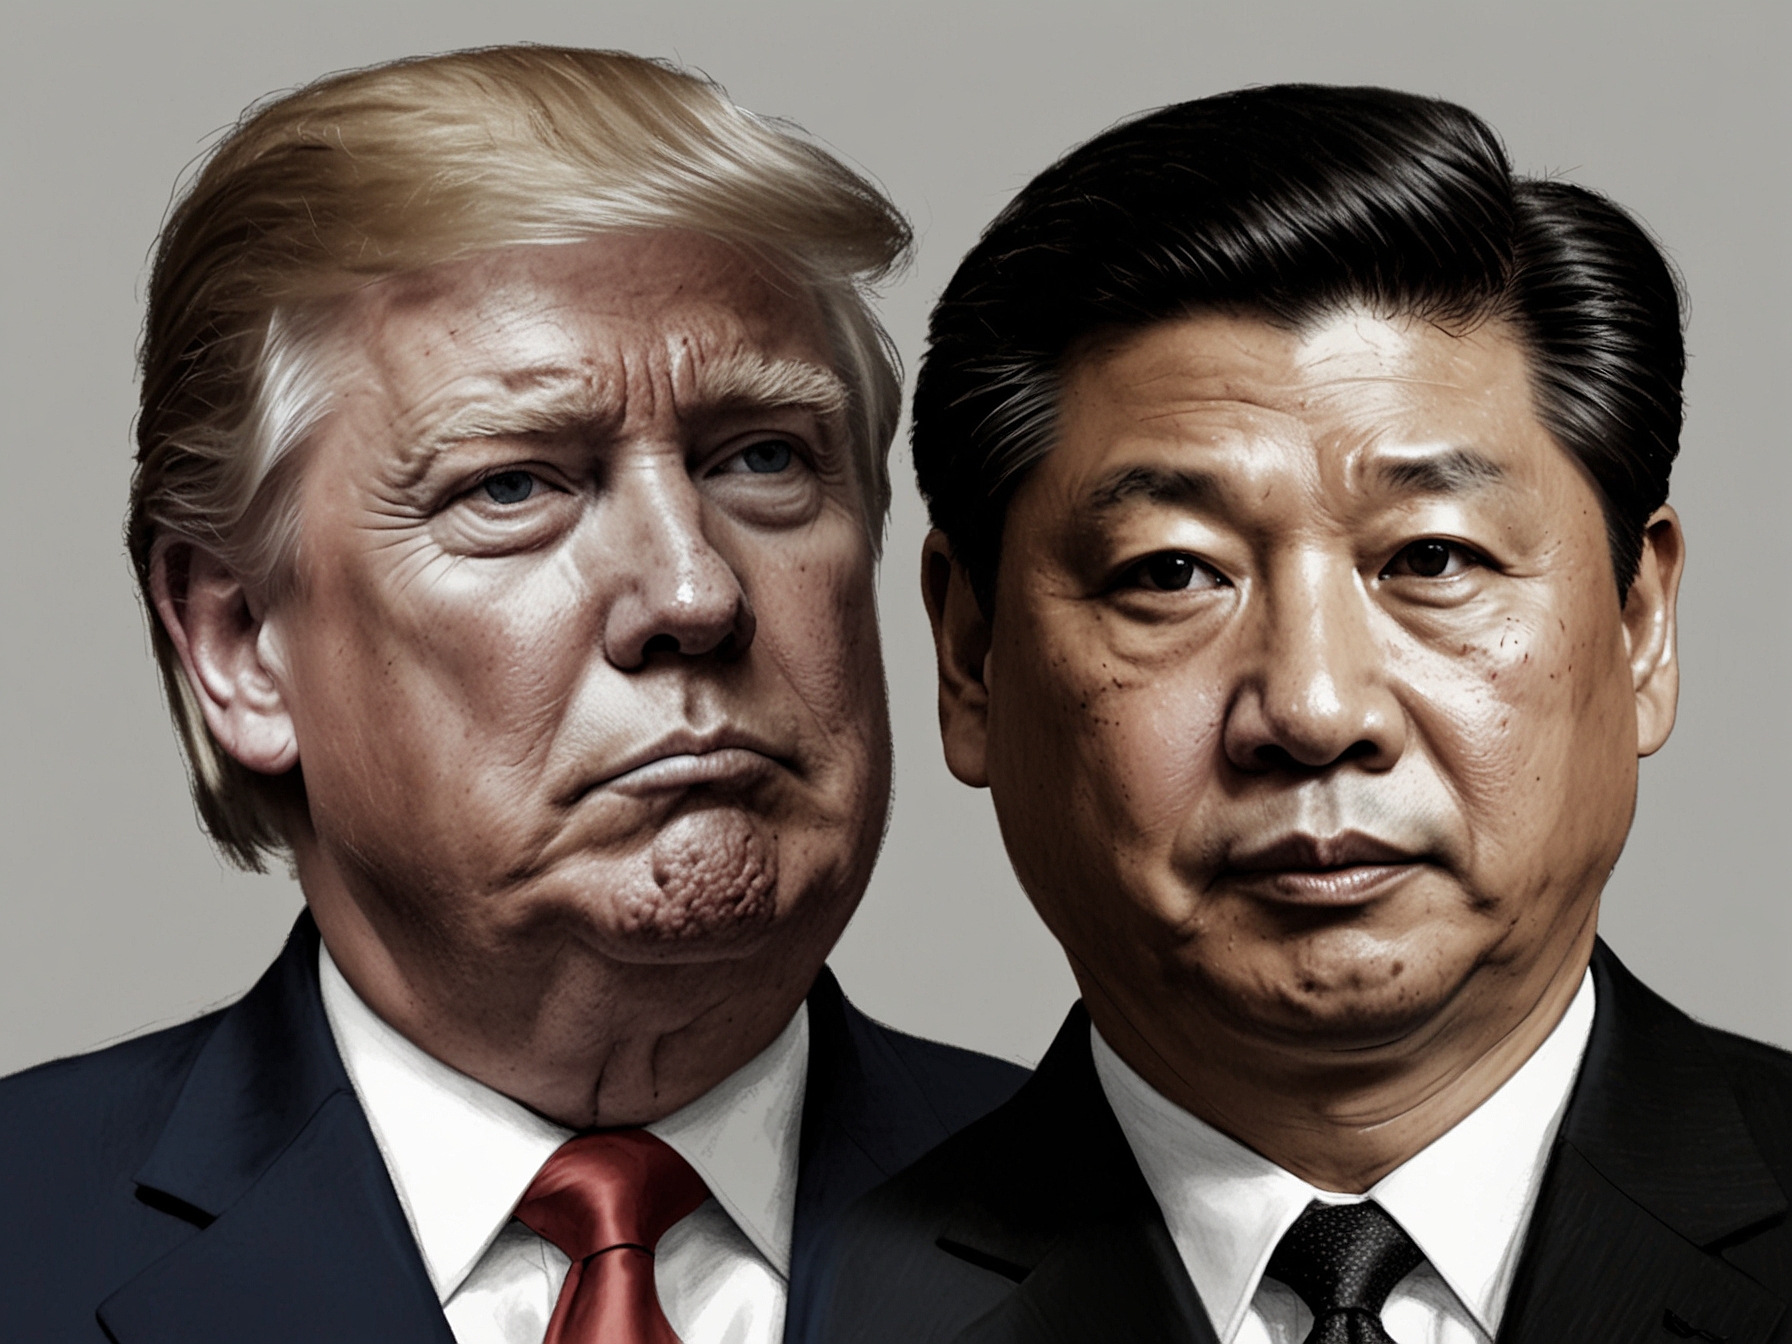 An illustration of President Trump and Chinese President Xi Jinping amid trade war tensions, reflecting a possible future scenario if Trump wins the 2024 election.